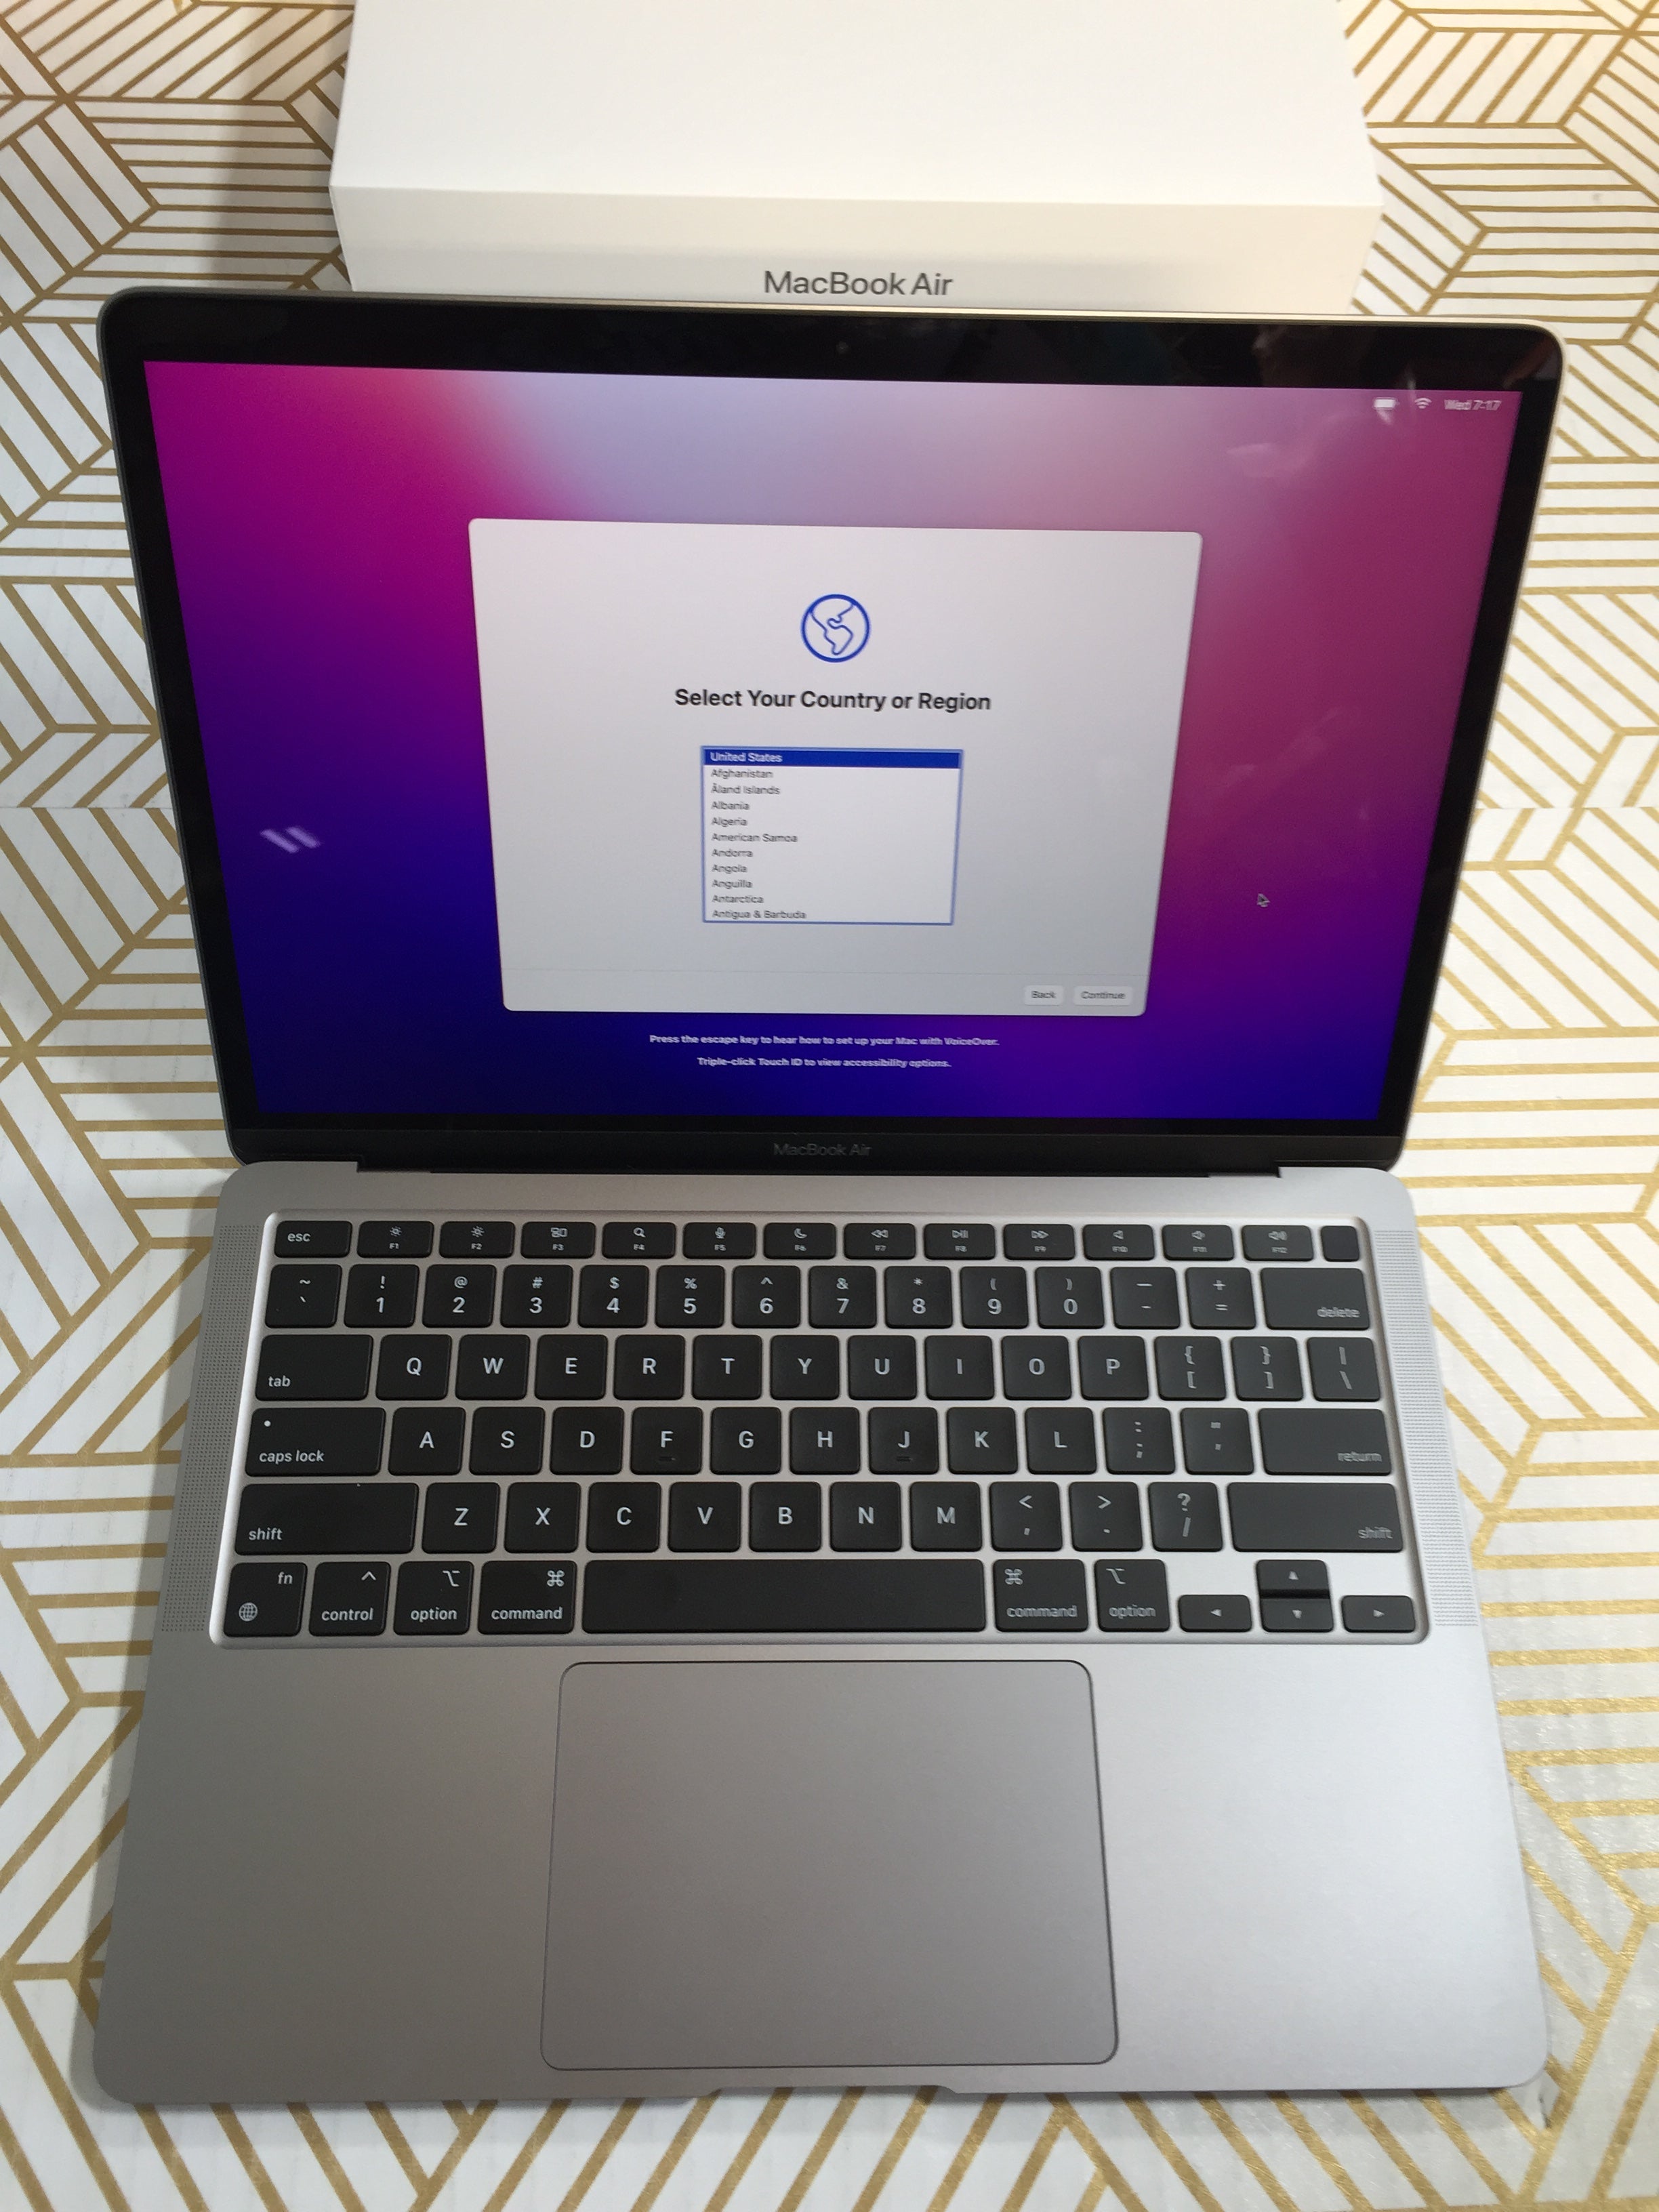 2020 Apple MacBook Air Laptop: Apple M1 Chip, 13” Retina Display, 8GB RAM, 256GB SSD Storage, Backlit Keyboard, FaceTime HD Camera, Touch ID. Works with iPhone/iPad; Space Gray (7746537980142)